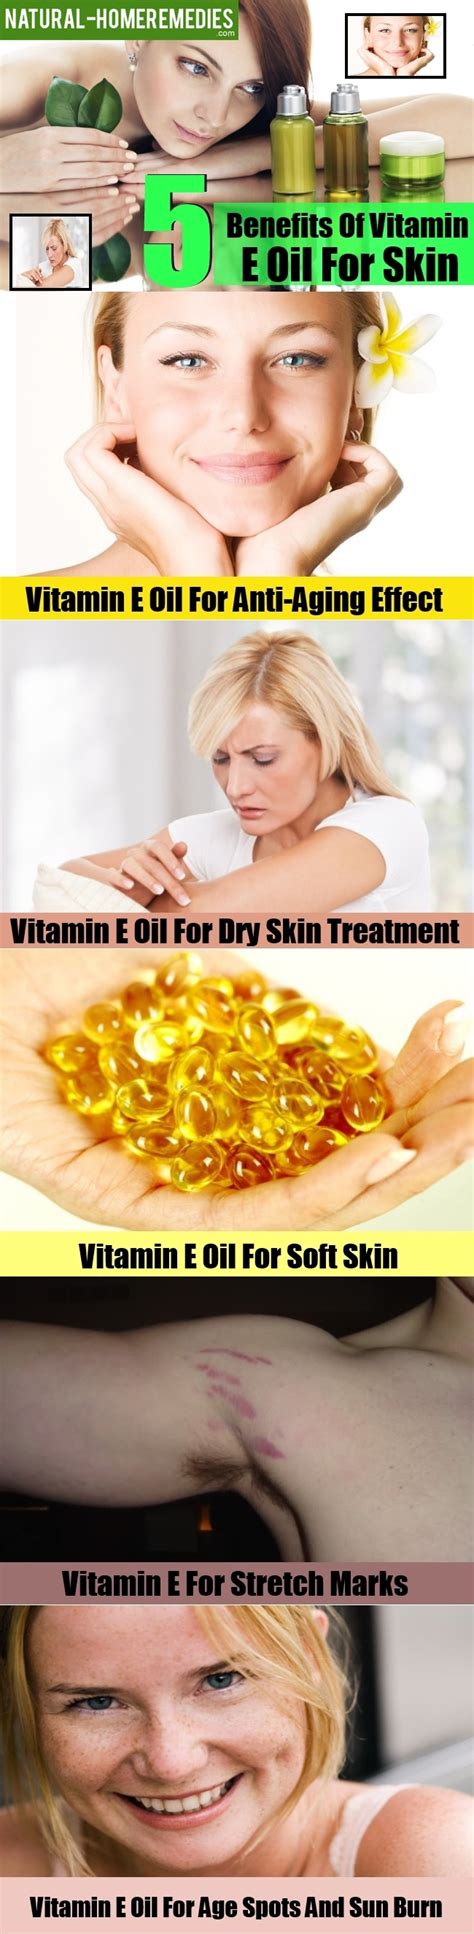 In recent years, vitamin e supplements have become popular as antioxidants. 5 Benefits Of Vitamin E Oil For Skin - Natural Home ...